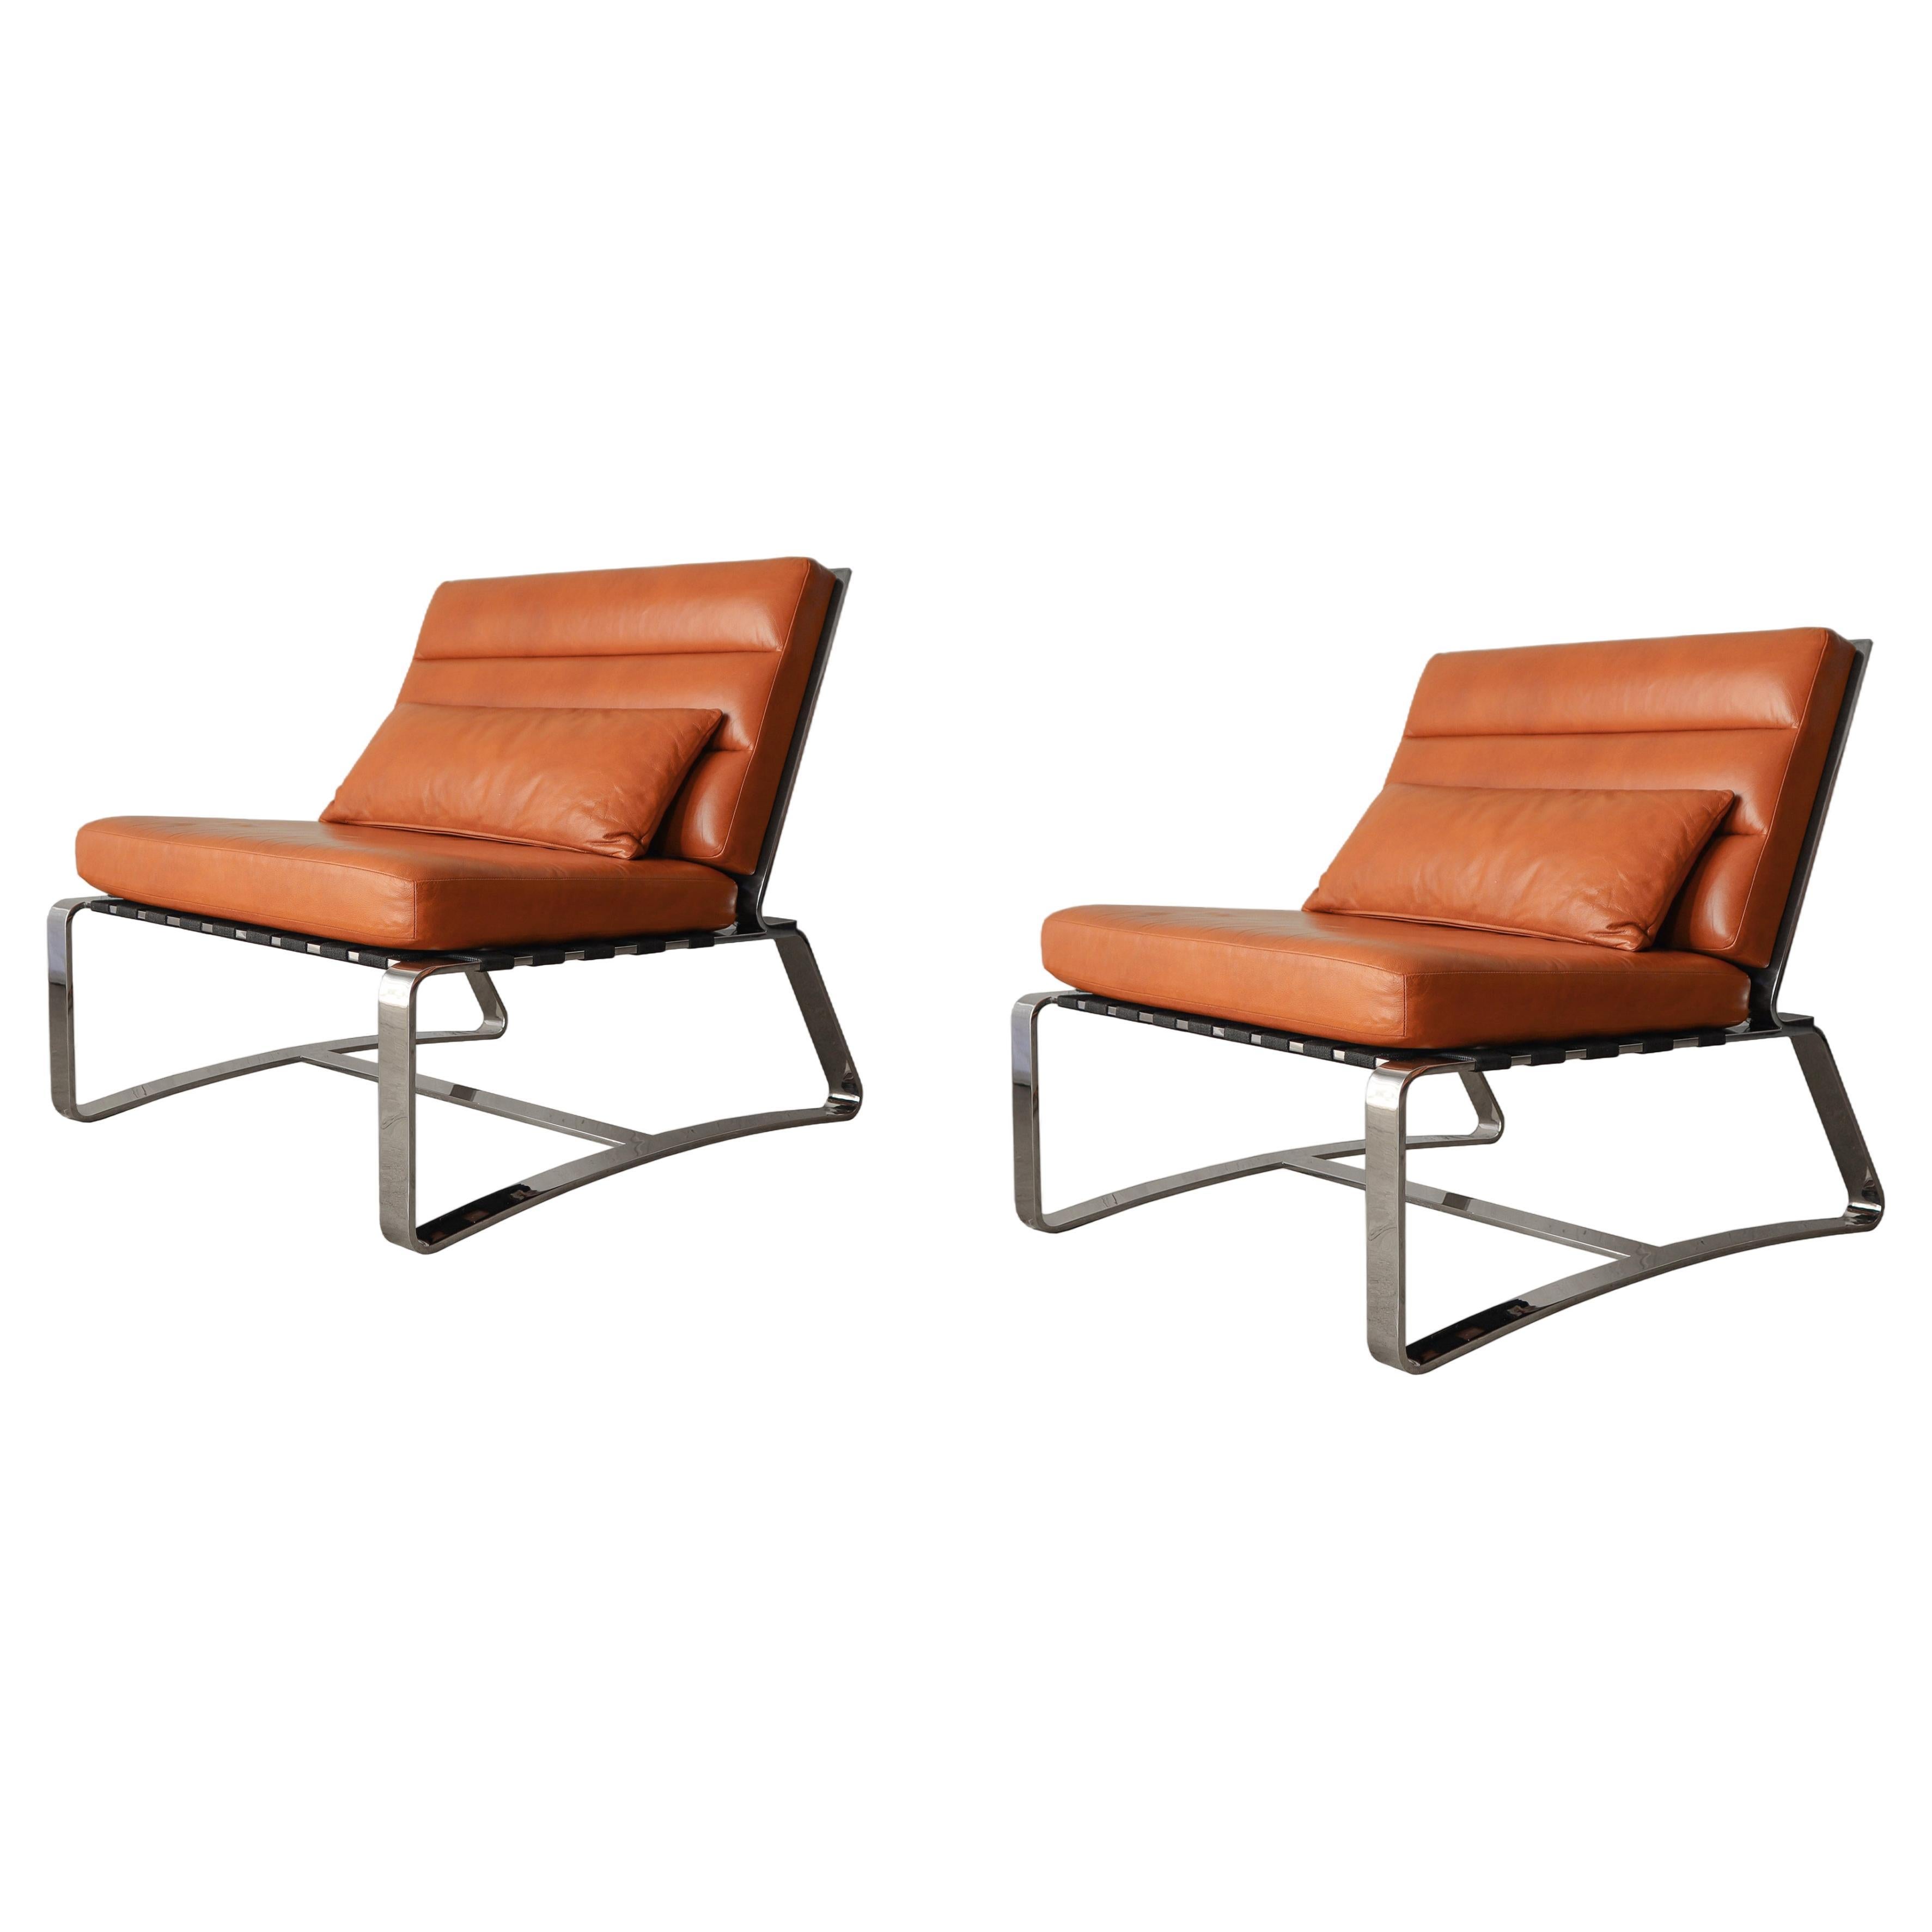 Substantial Pair of Italian Stainless Steel and Leather Lounge Chairs For Sale